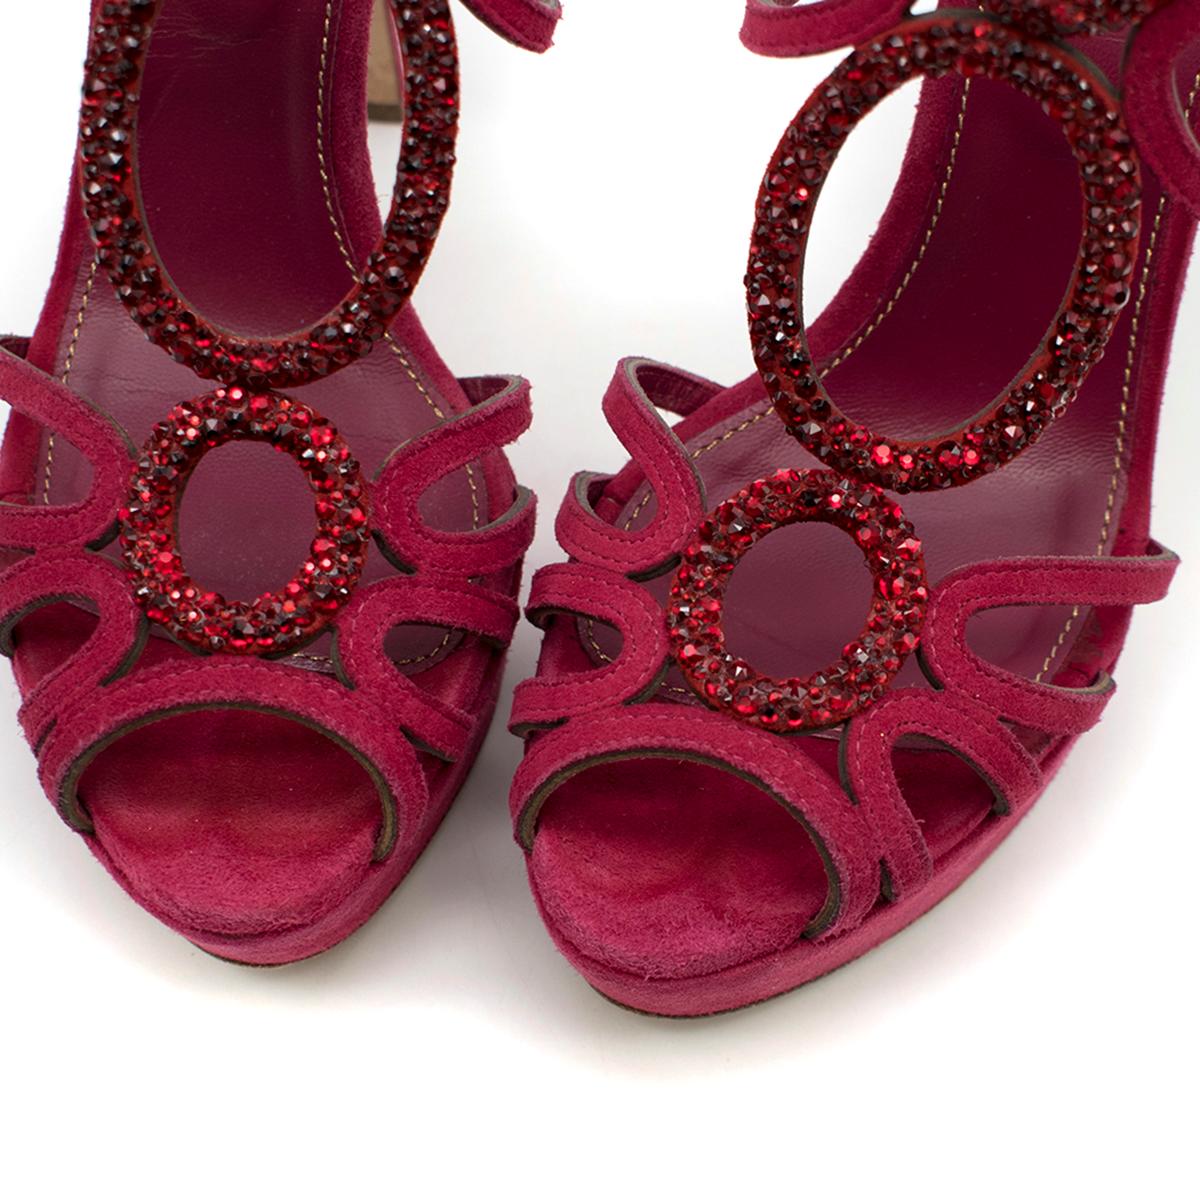 Sergio Rossi Raspberry Rhinestone-embellished Heeled Sandals SIZE 36.5 In Good Condition For Sale In London, GB